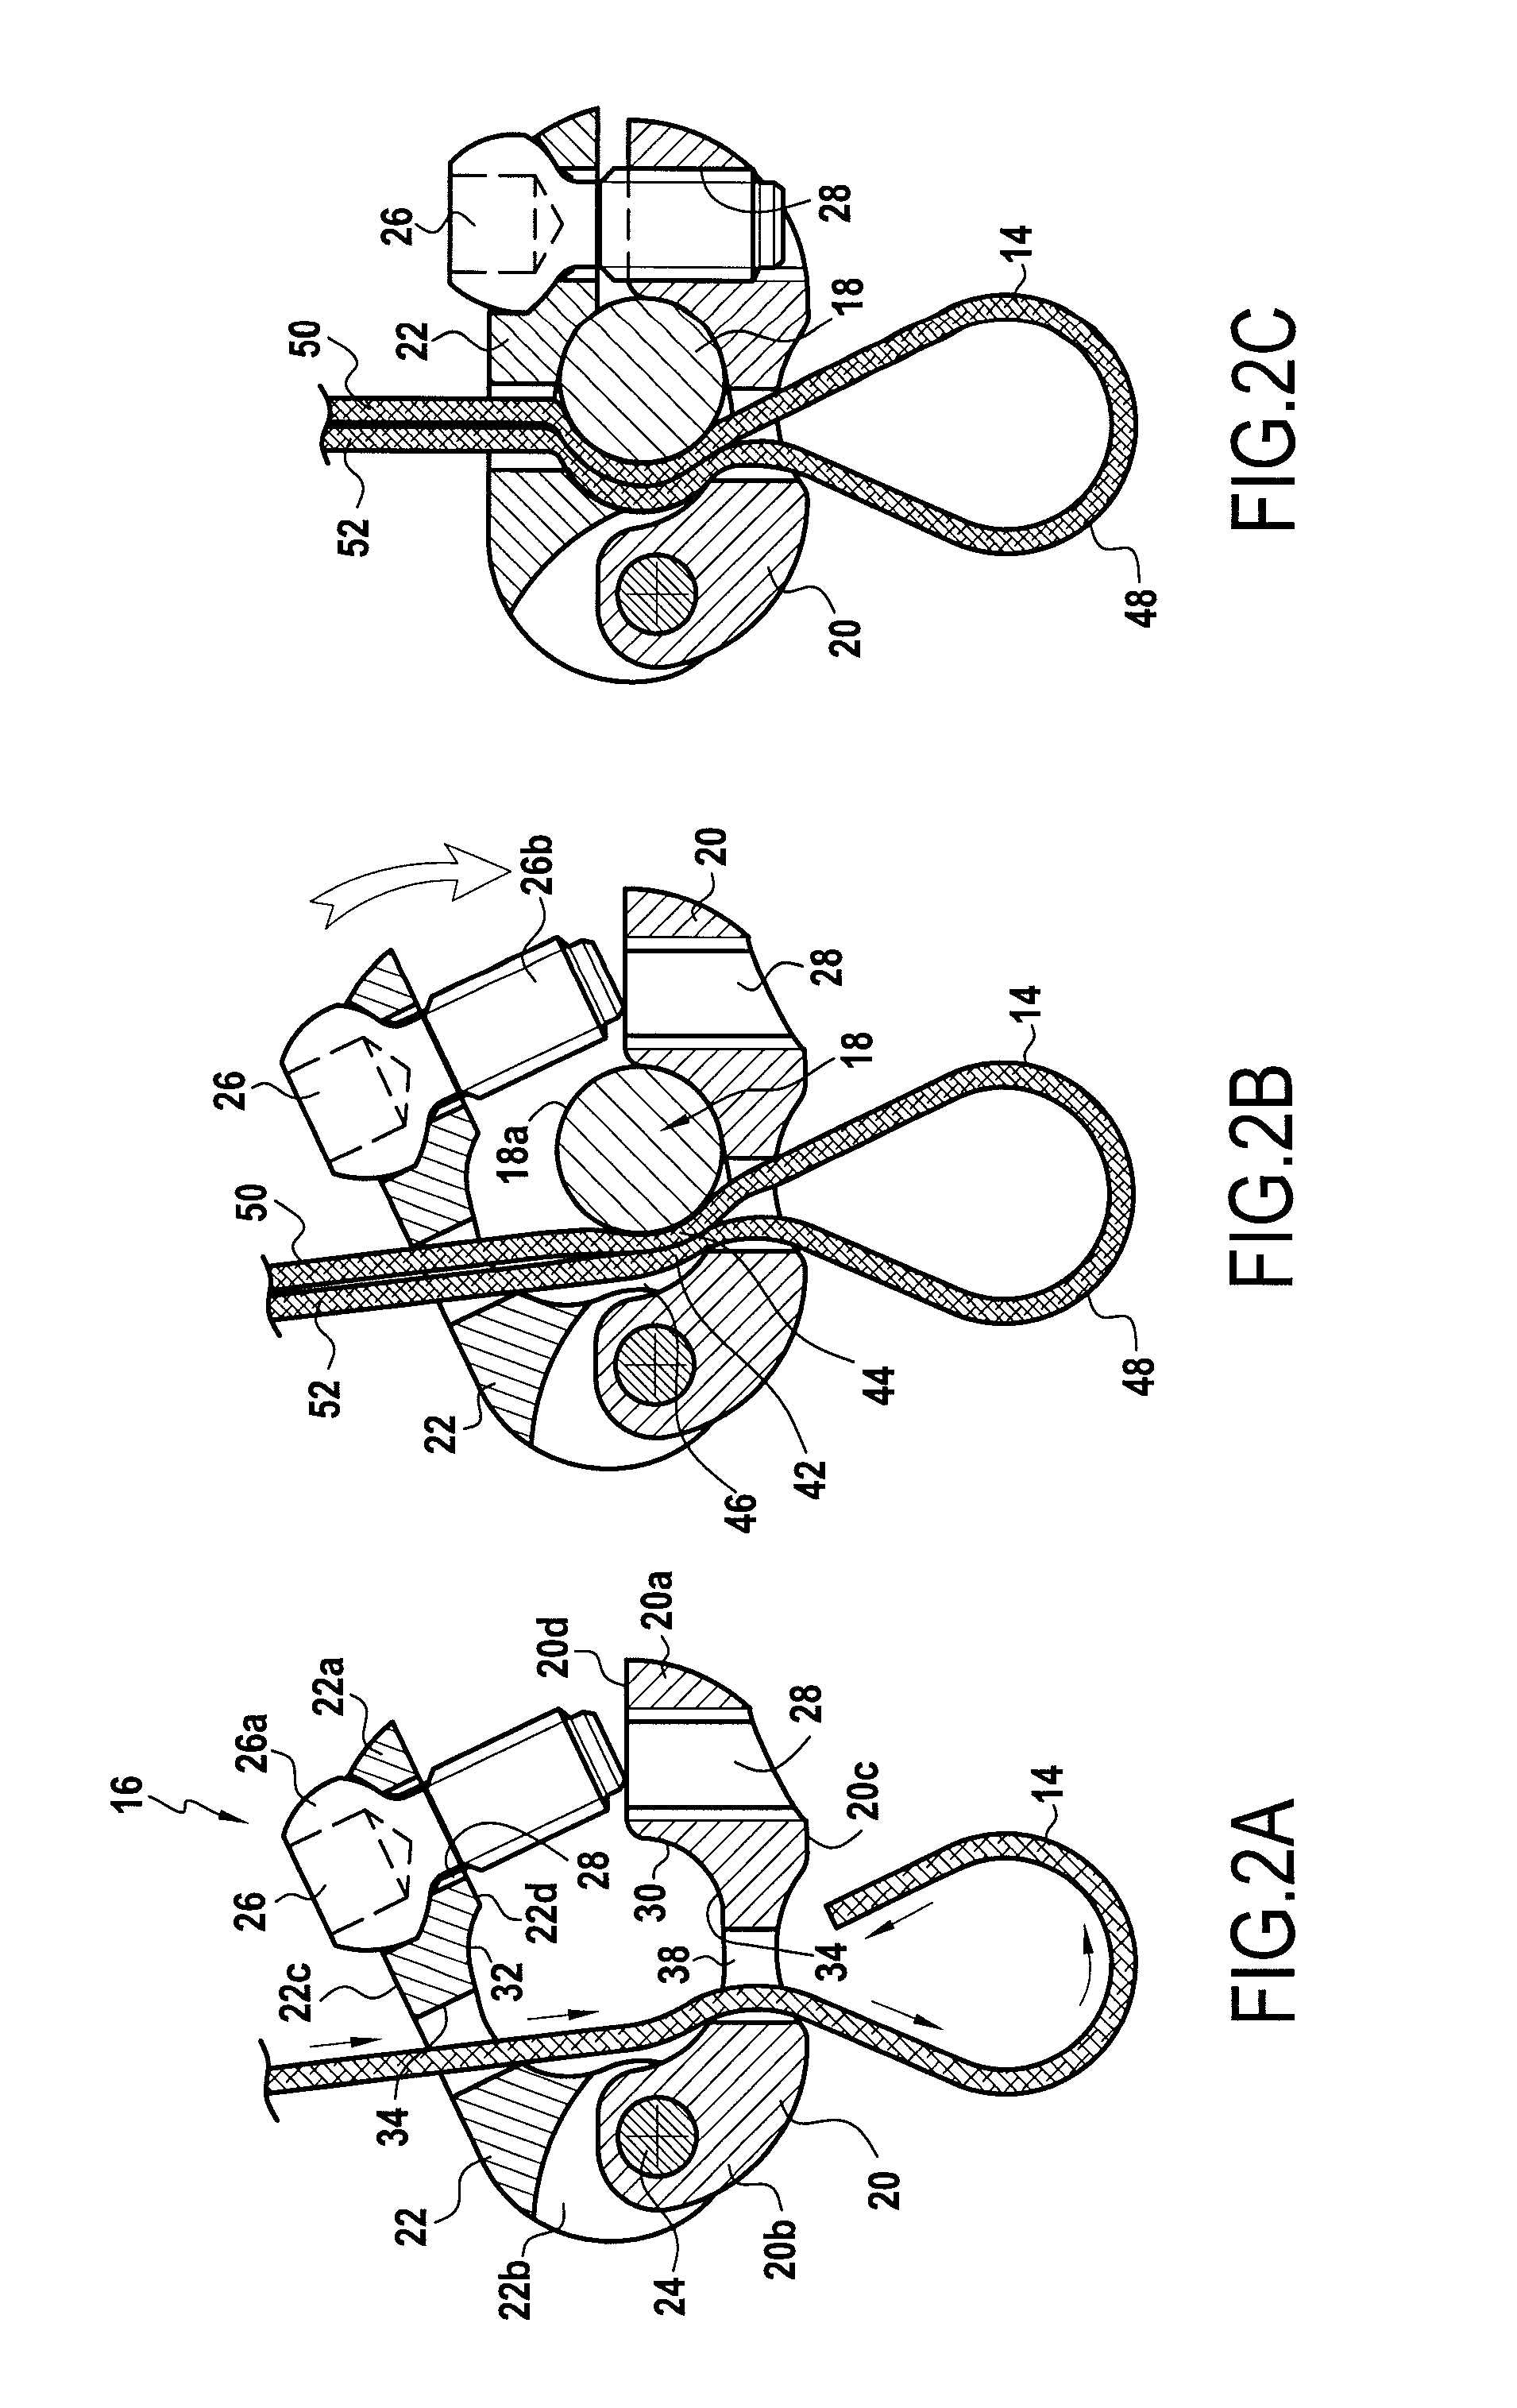 Fixing devices and stabilization systems using said fixing devices